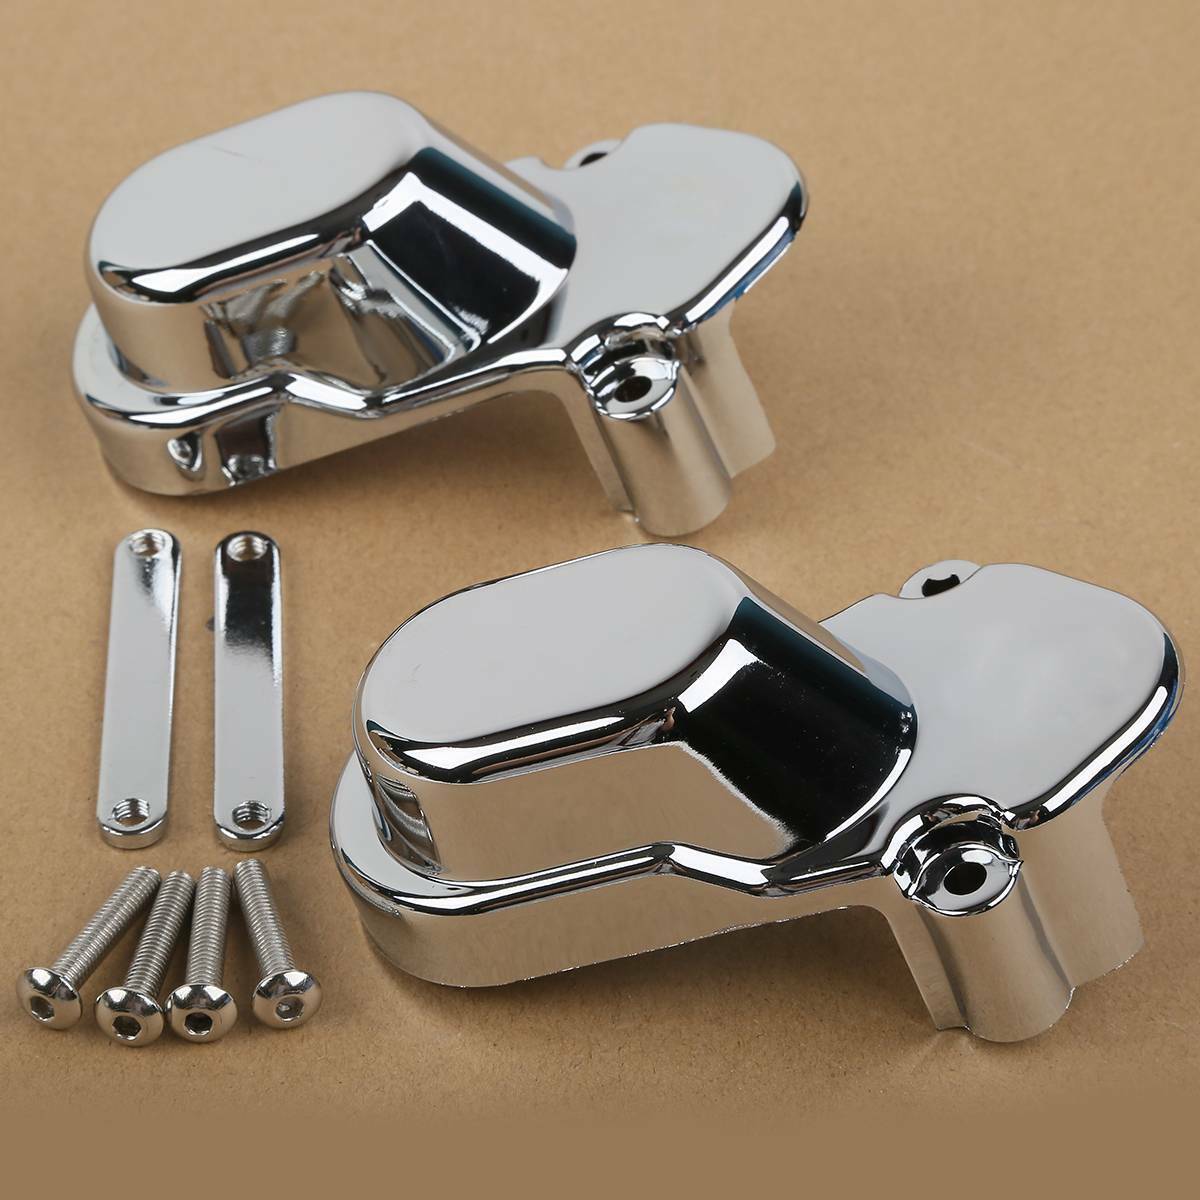 Chrome ABS Rear Wheel Axle Kit Cover Fit For Harley Sportster 1200 883 2005-2023